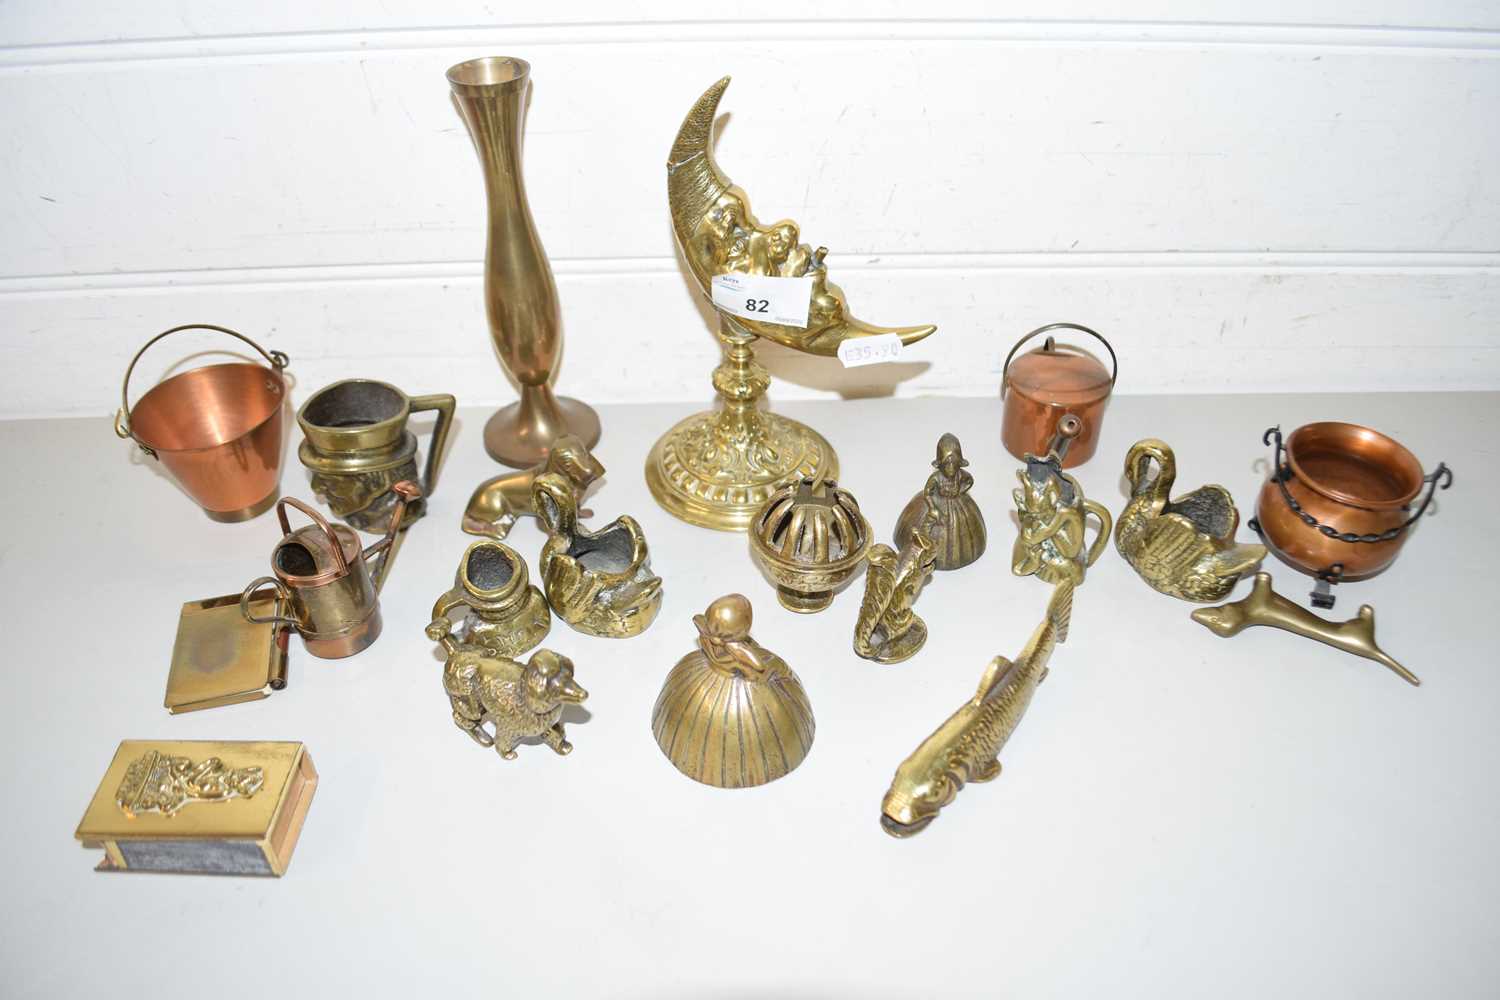 COLLECTION OF VARIOUS ASSORTED SMALL BRASSES, COPPER ORNAMENTS